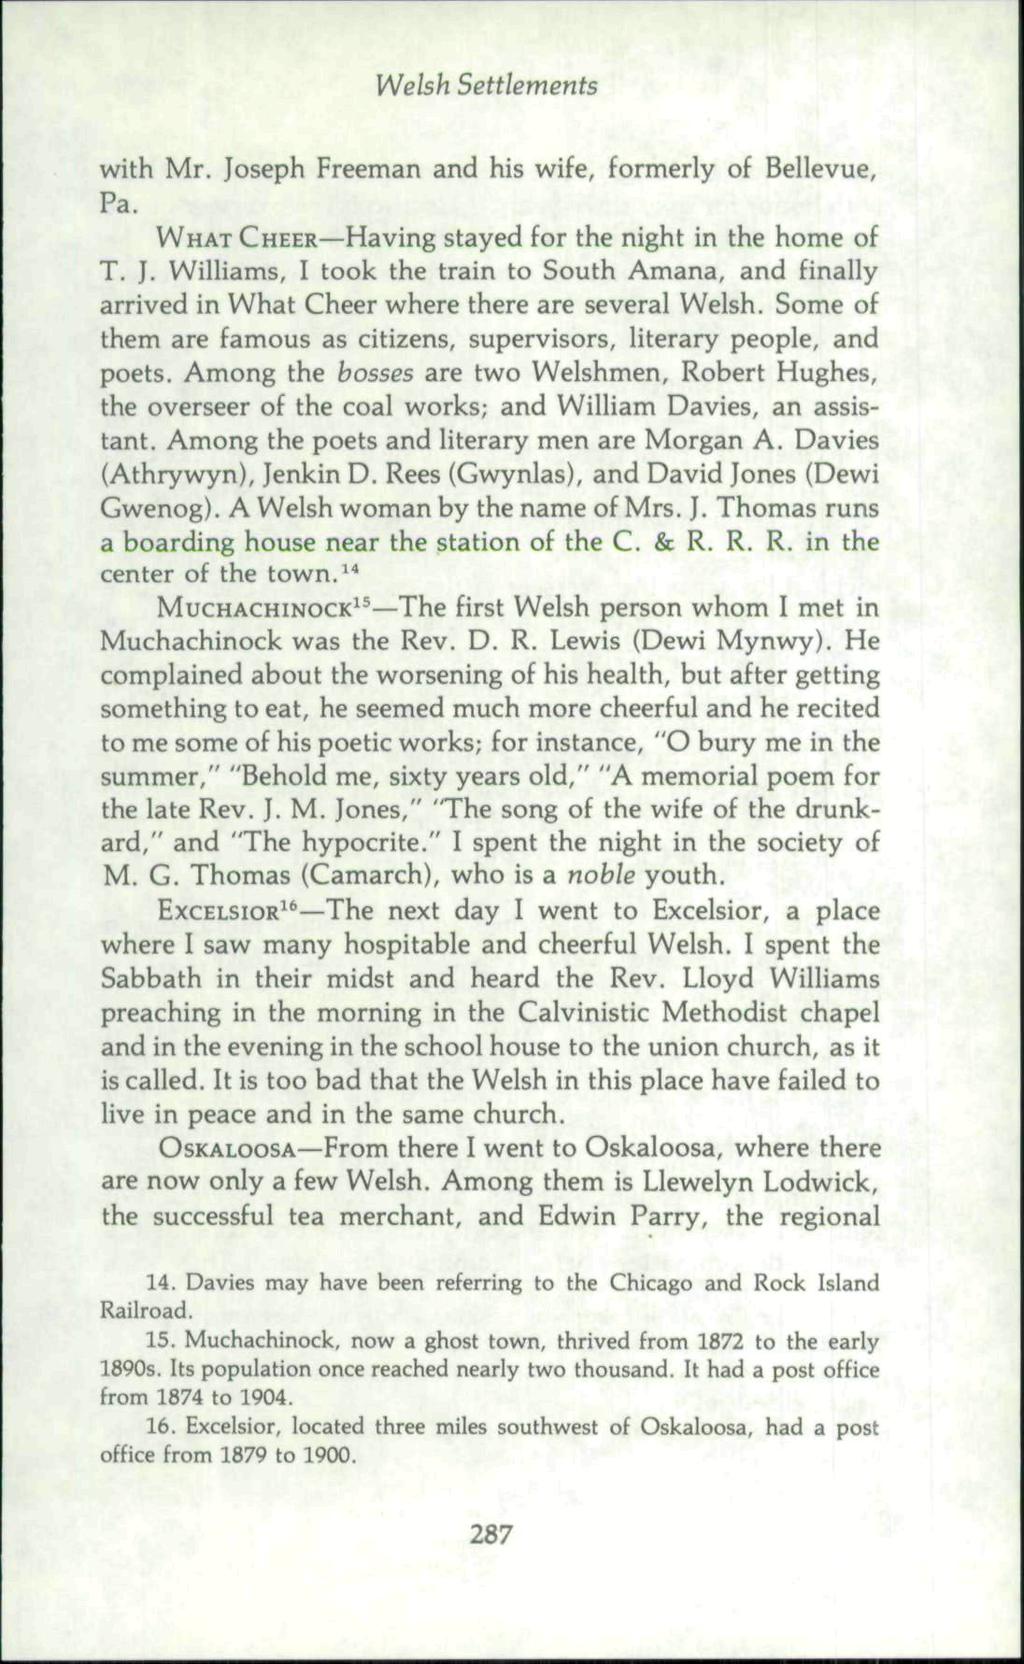 Webh Settlements. ' -I with Mr. Joseph Freeman and his wife, formerly of Bellevue, Pa. WHAT CHEER Having stayed for the night in the home of T. J. Williams, I took the train to South Amana, and finally arrived in What Cheer where there are several Welsh.